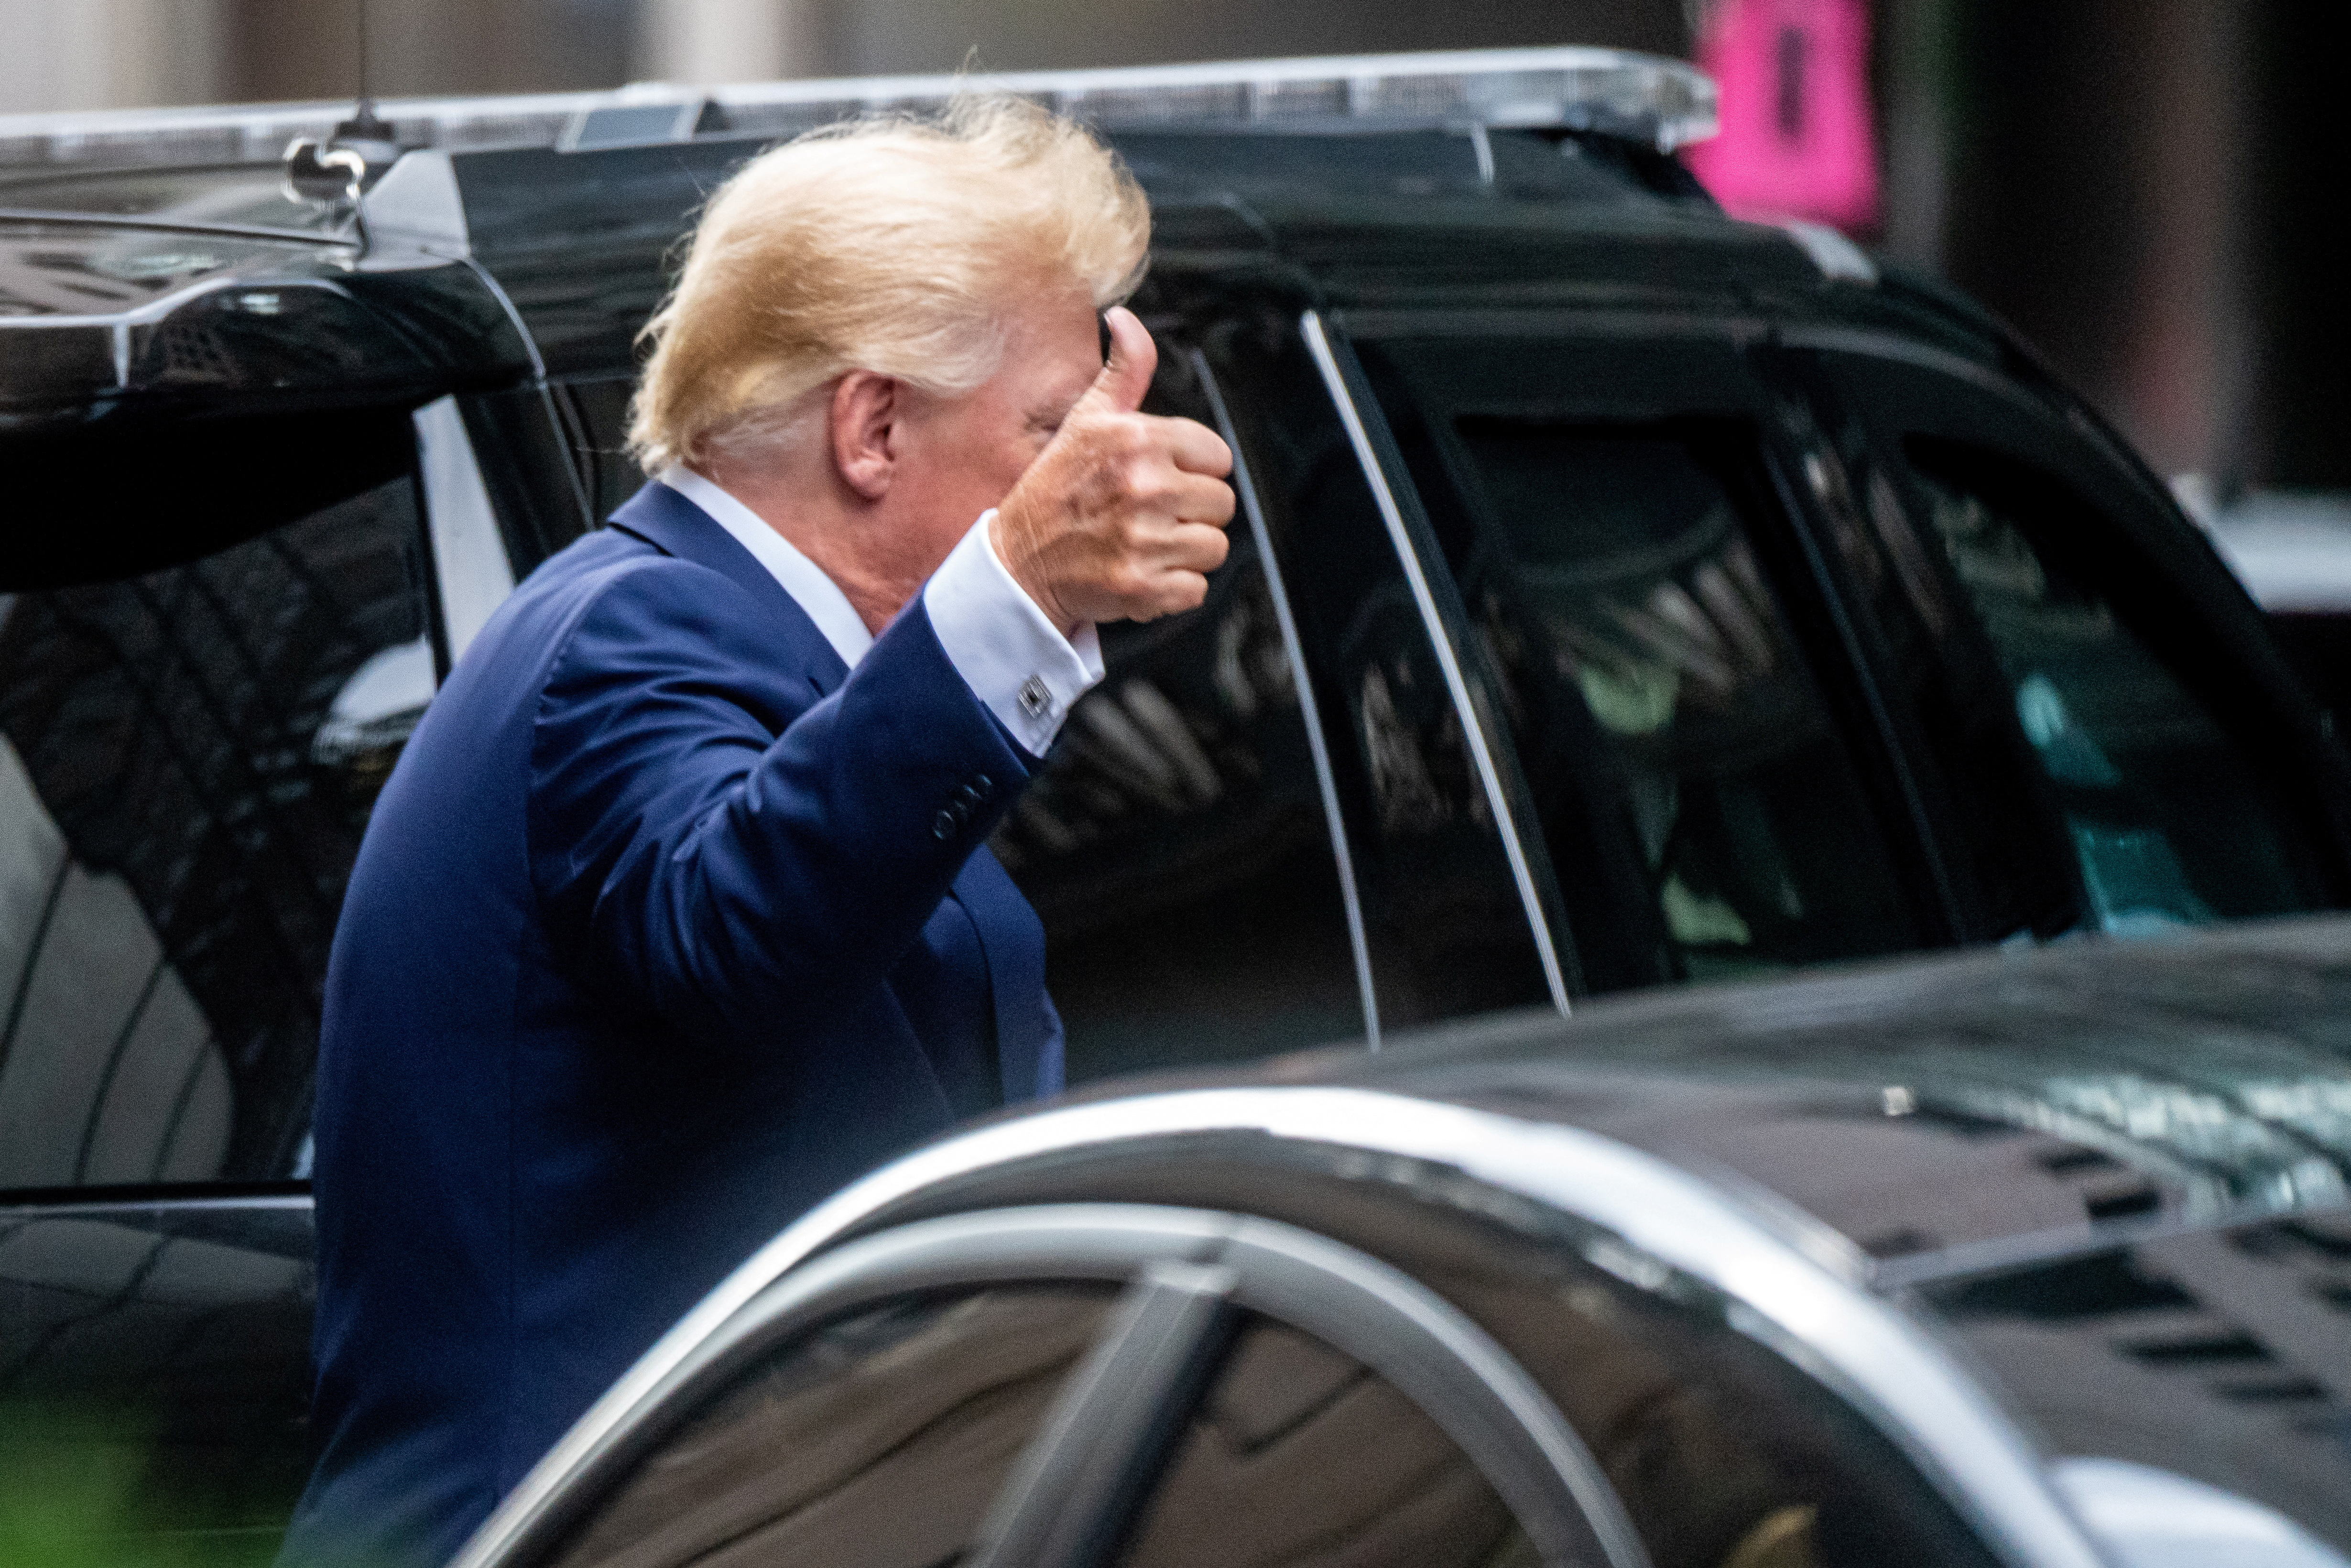 Former U.S. President Donald Trump departs Trump Tower for a deposition two days after FBI agents raided his Mar-a-Lago Palm Beach home